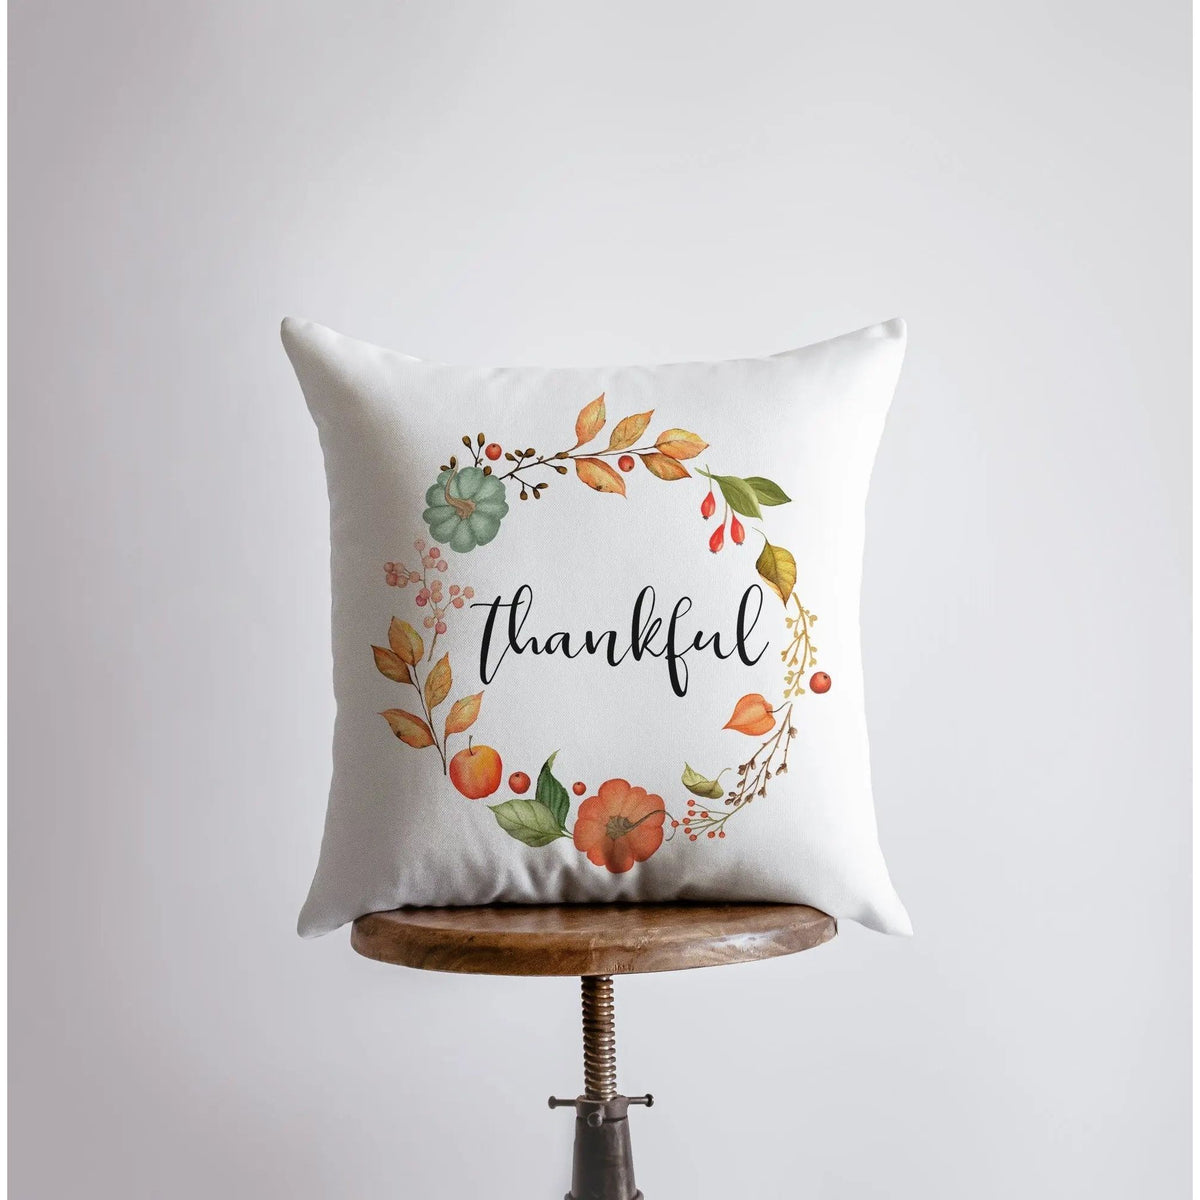 Thankful Pillow | Pillow Cover